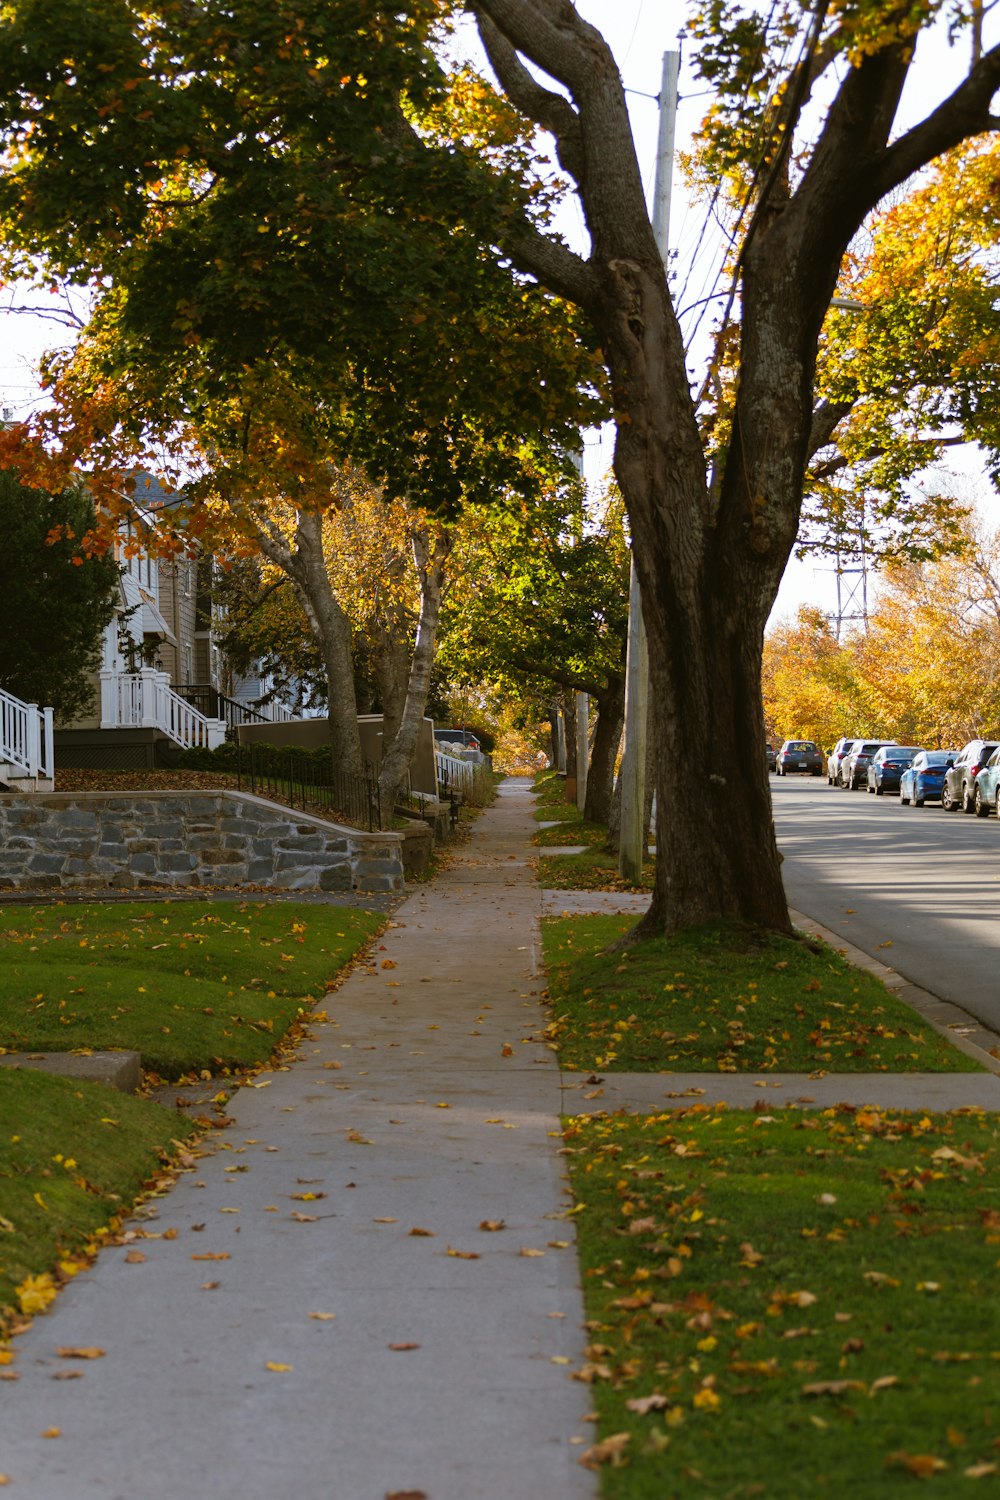 a sidewalk with trees and a house in the background